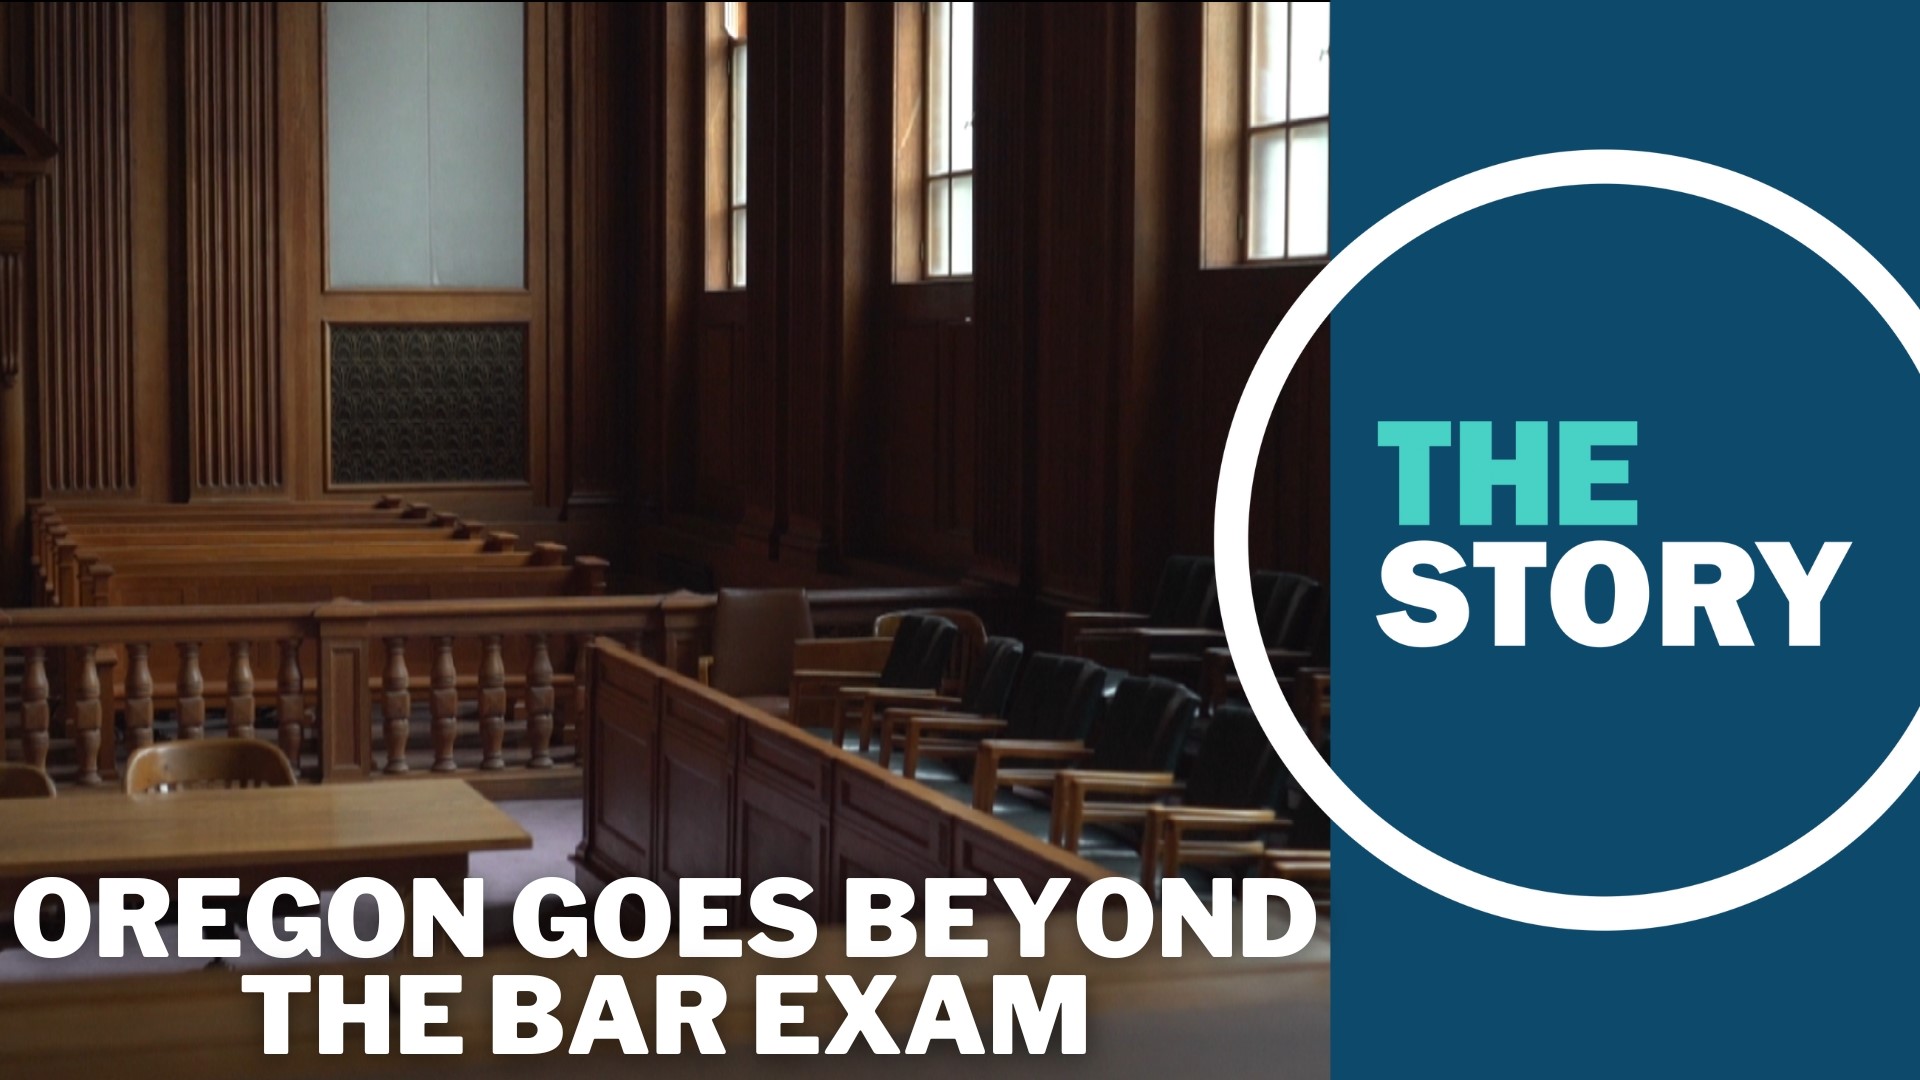 The bar exam is a grueling multi-day test that about 40% of test-takers fail. In Oregon, law school grads will now have another way to become licensed to practice.